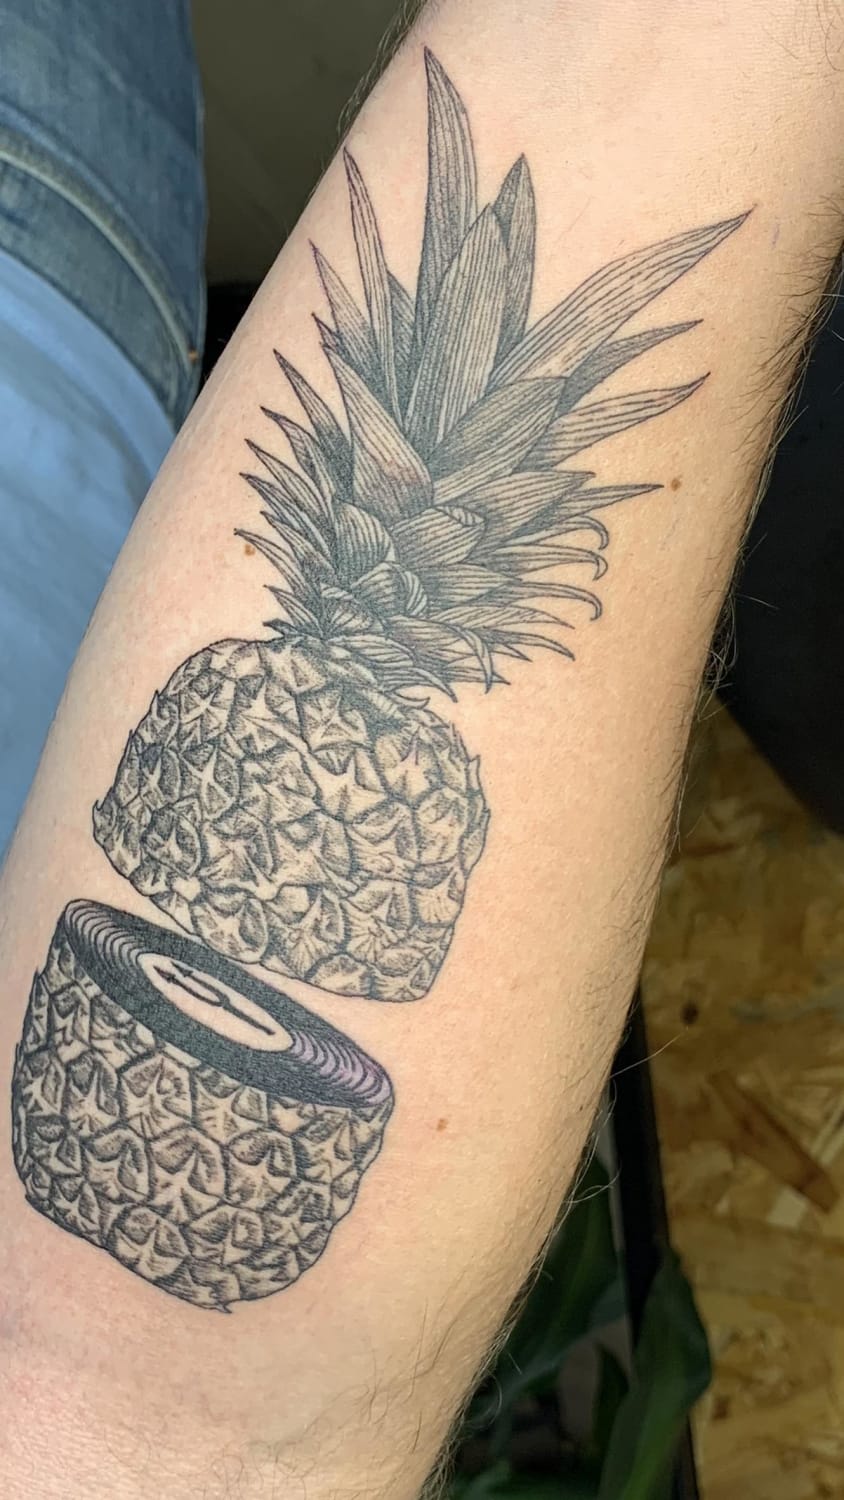 Songs For The Deaf Pineapple by Monkey the Human Boy in Bogota, Colombia